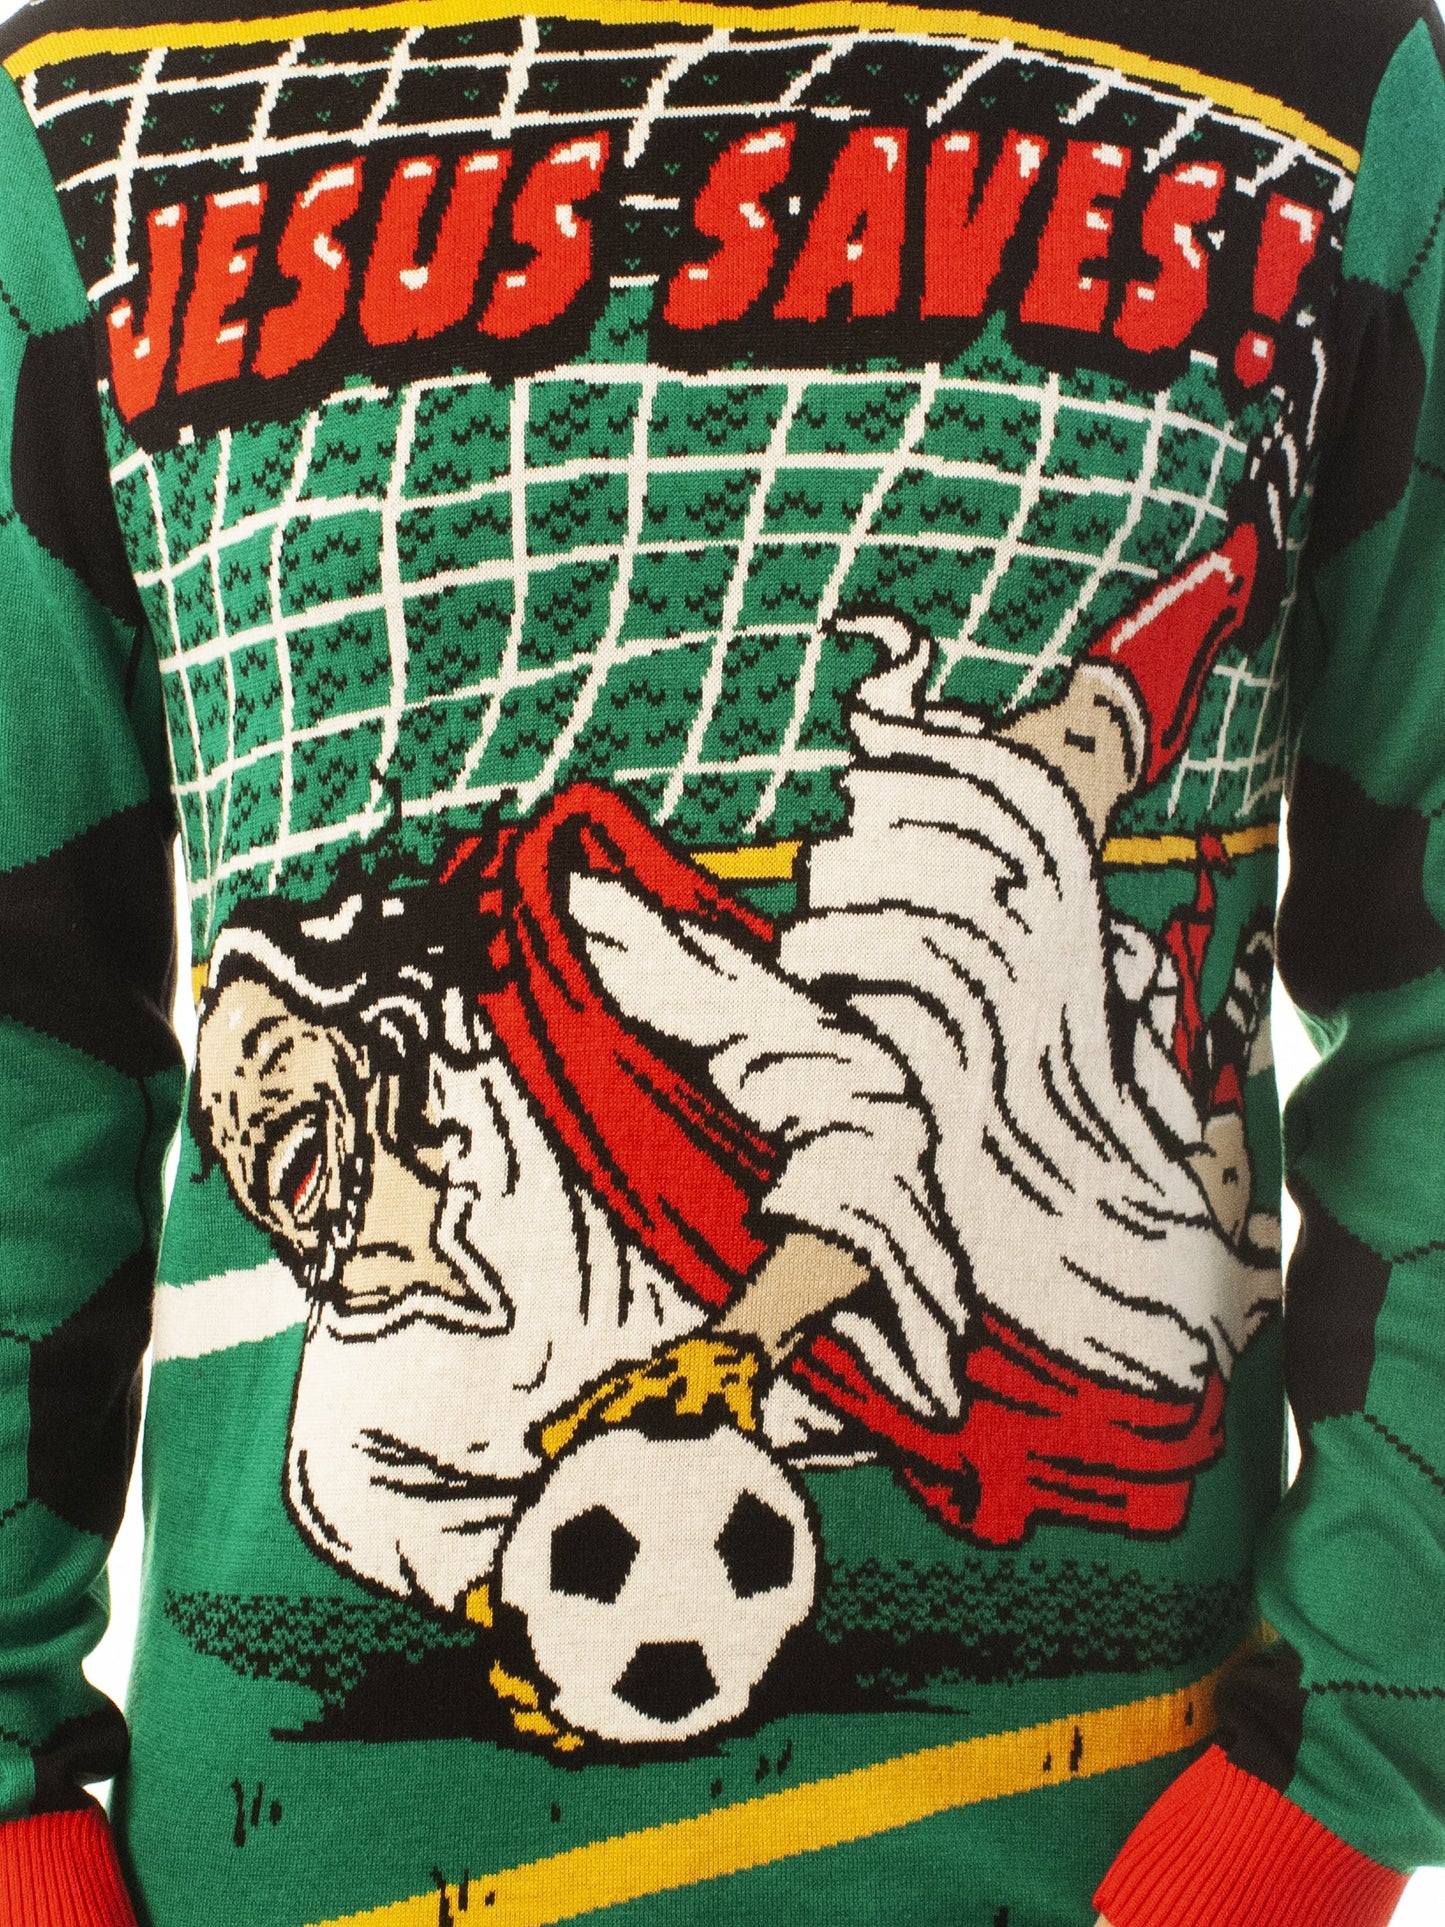 Jesus Saves Jesus Plays Soccer Funny Ugly Christmas Sweater - Jesus Christ Sweater - Christian Shirts Gifts Idea